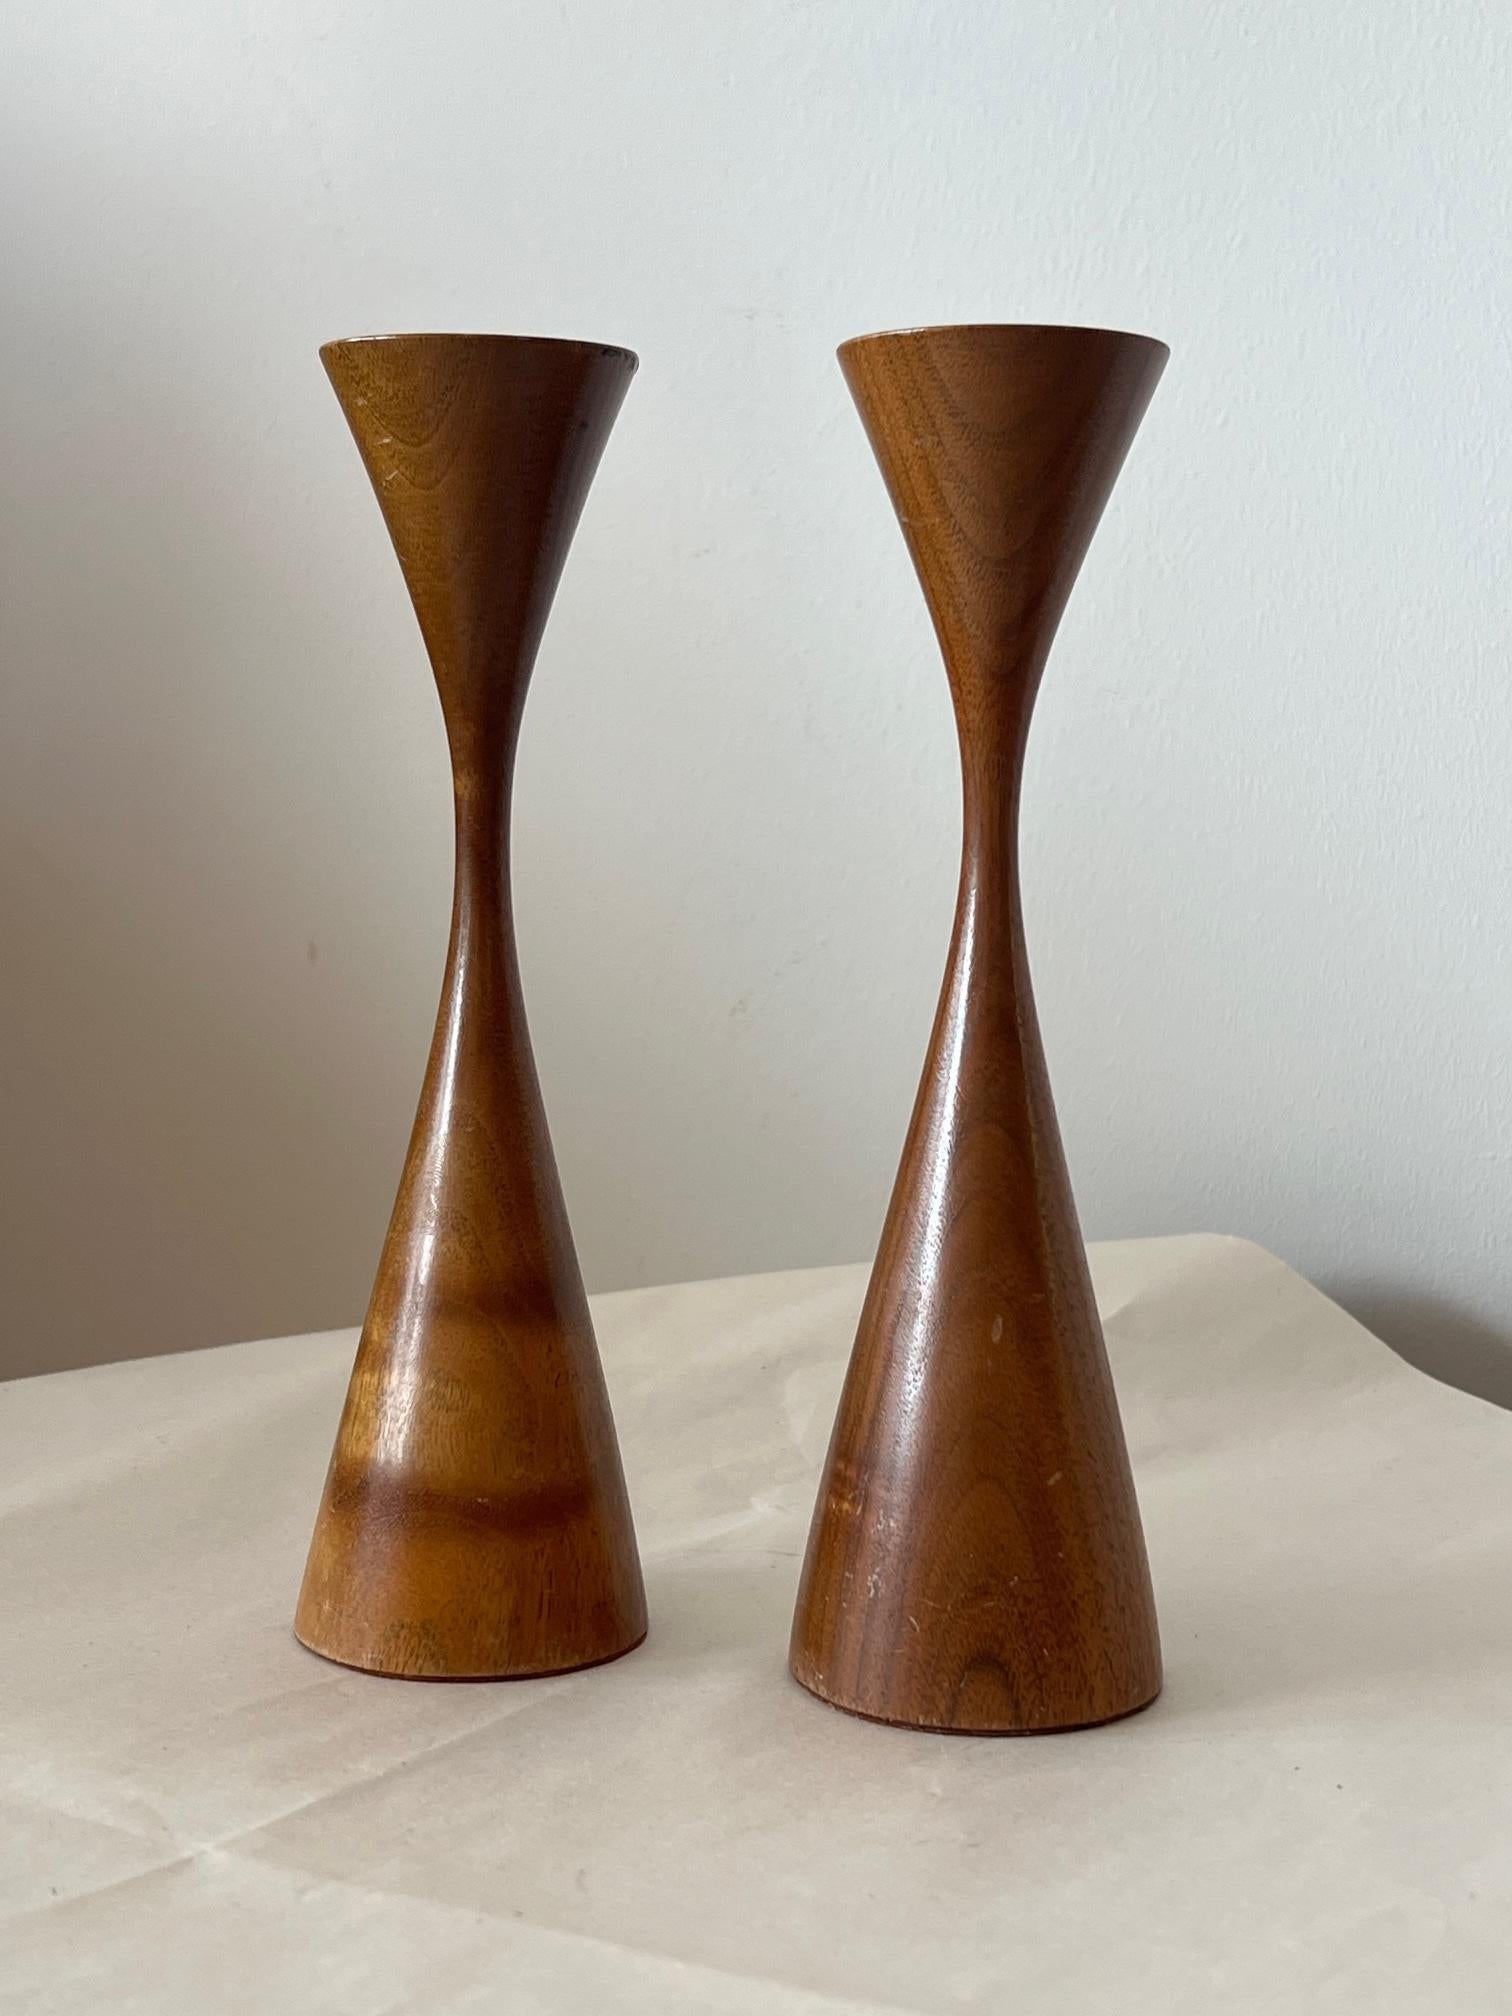 A pair of turned walnut candlesticks by Rude Osolnik, ca' 1970's.
